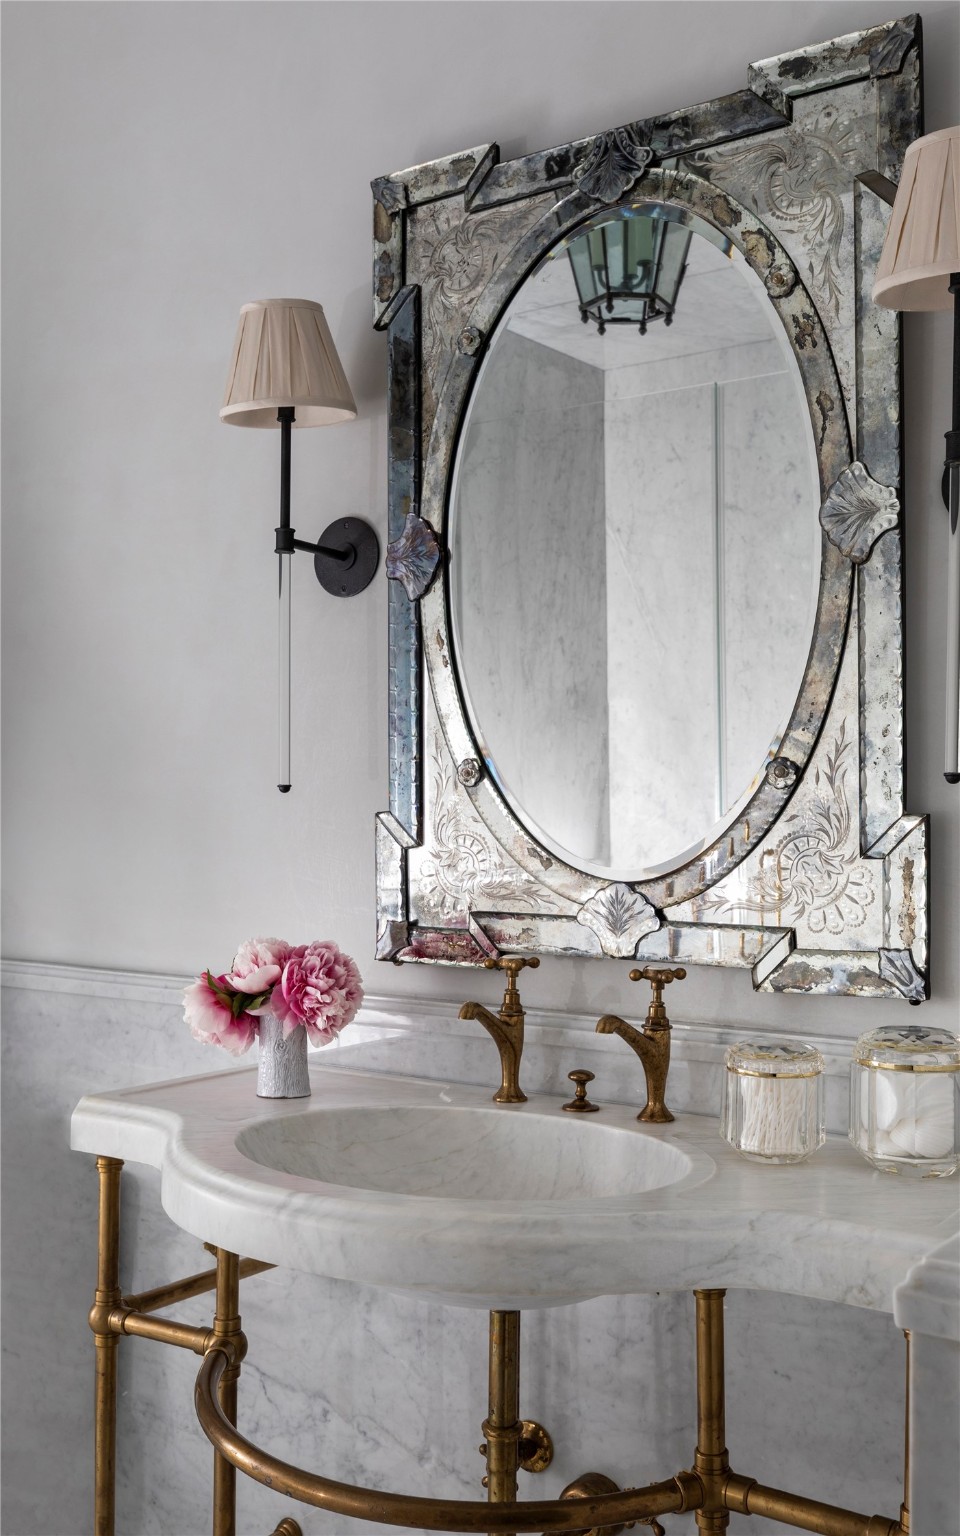 This impeccable ensuite bathroom epitomizes sheer sophistication with honed Carrera marble floor with slab shower walls, wainscot, and vanity. Quartz sconces, an antique Venitian mirror, and a polished brass electric towel warmer enhance the elegance.